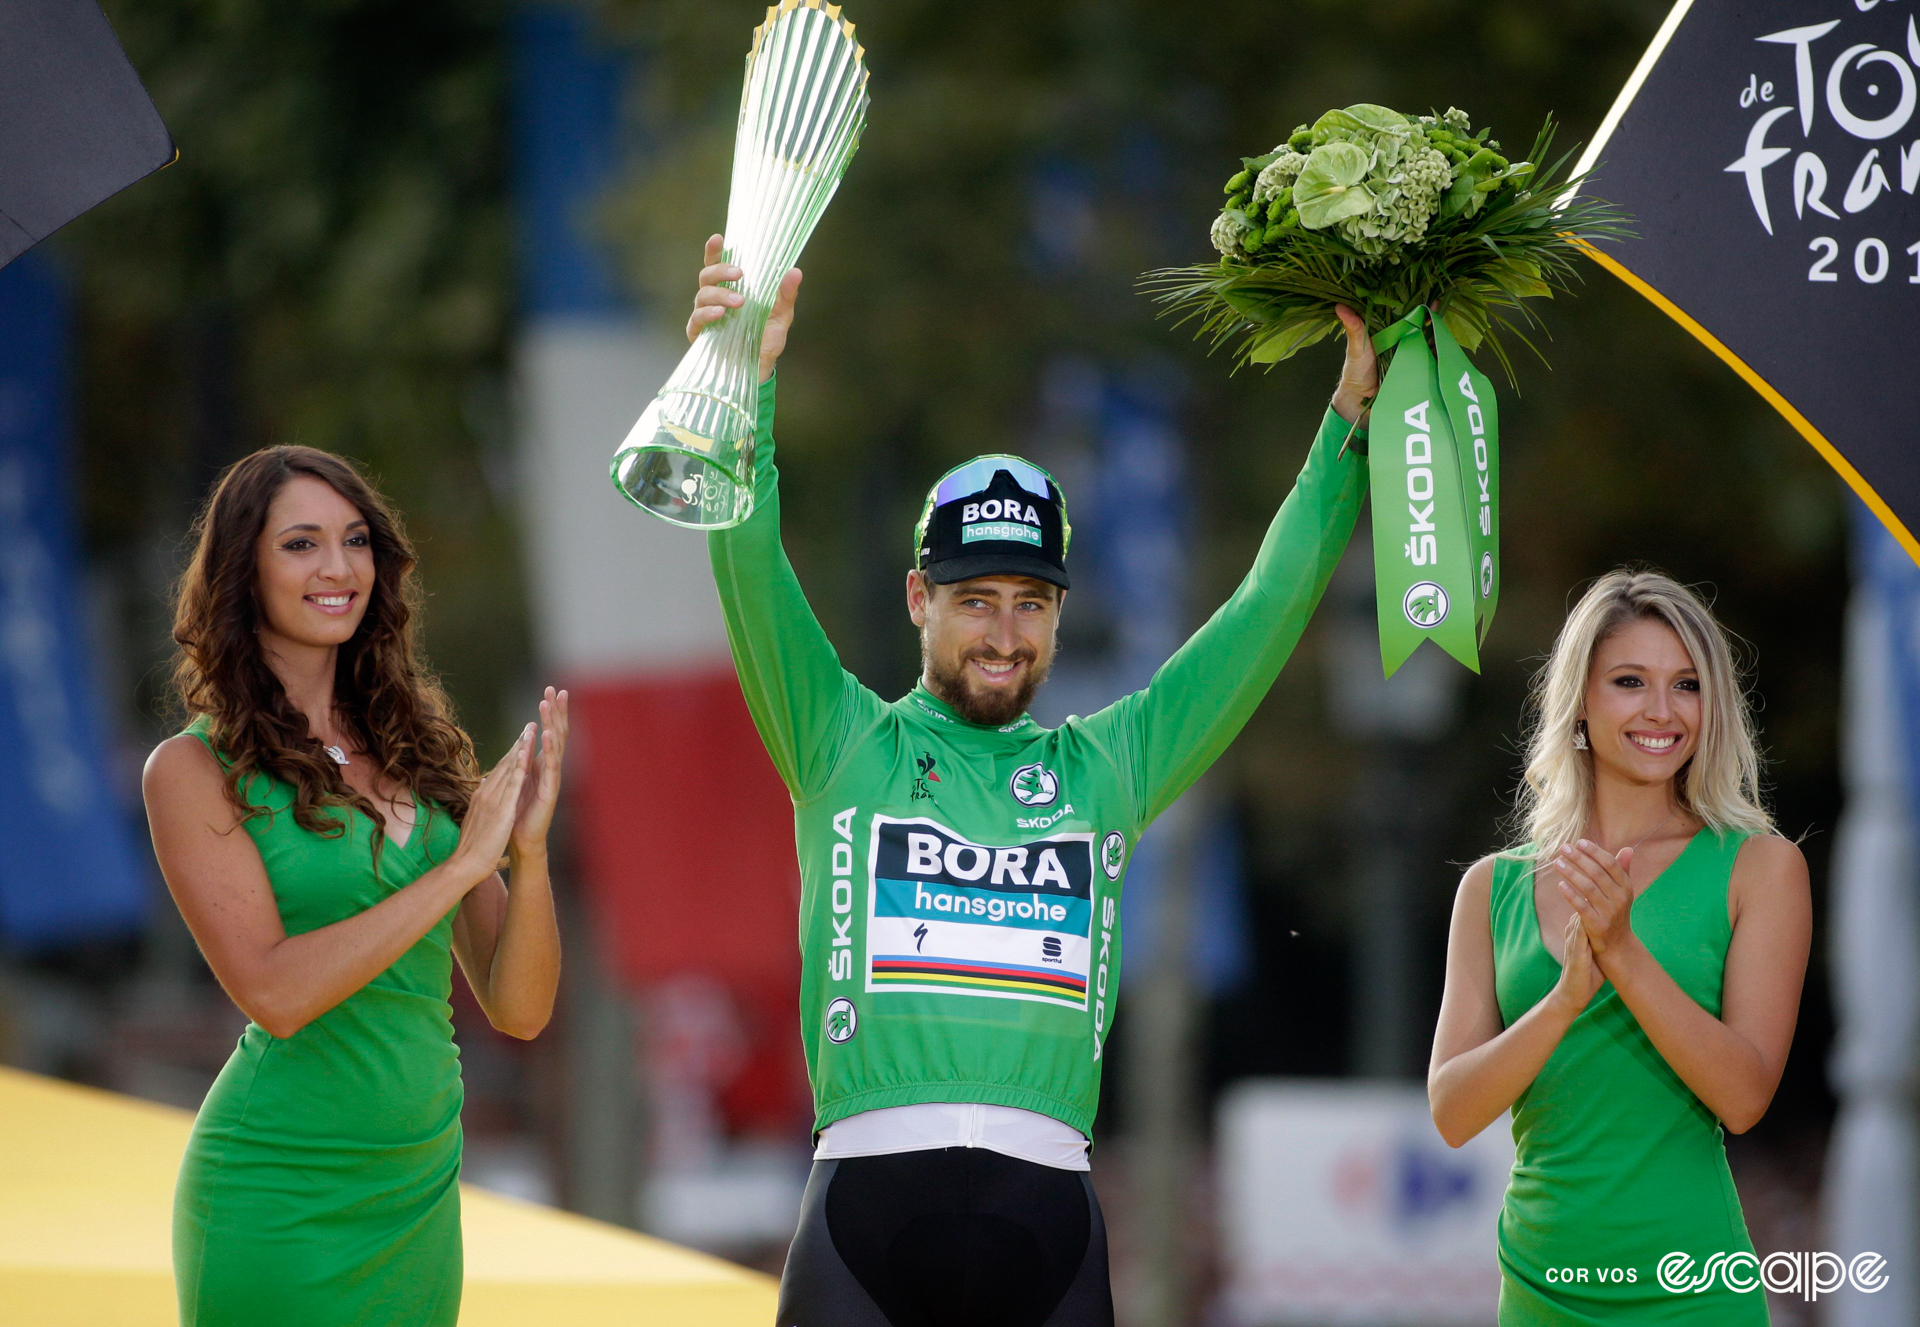 Peter Sagan on the final podium at the 2018 Tour de France wearing green, holding a bouquet of flowers and trophy, with a podium hostess on either side of him.